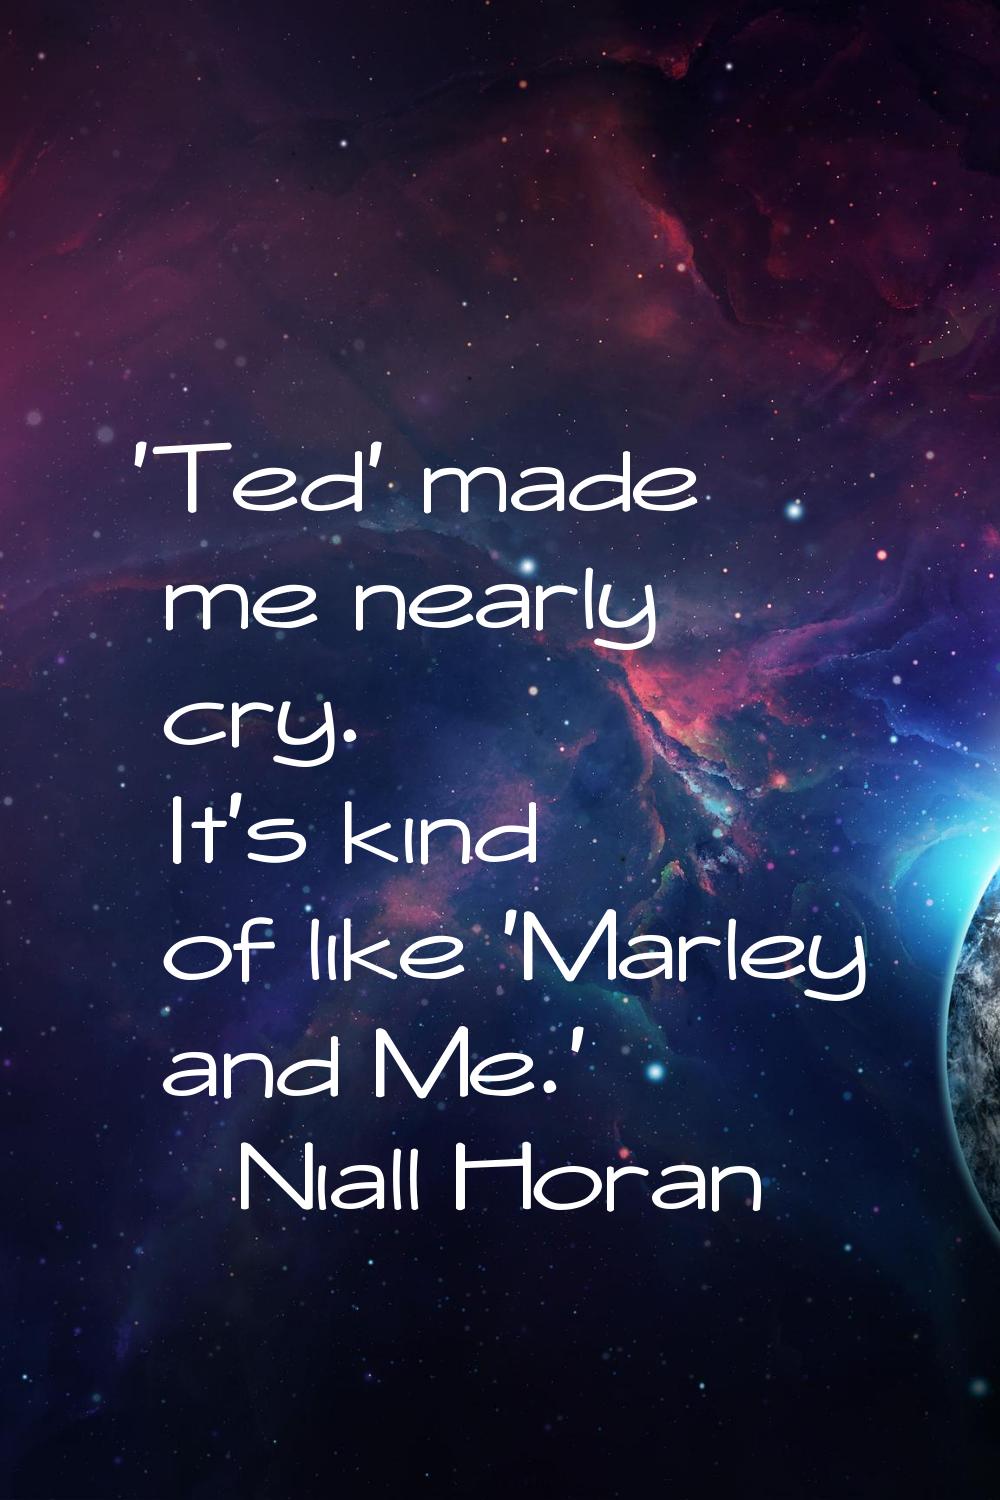 'Ted' made me nearly cry. It's kind of like 'Marley and Me.'